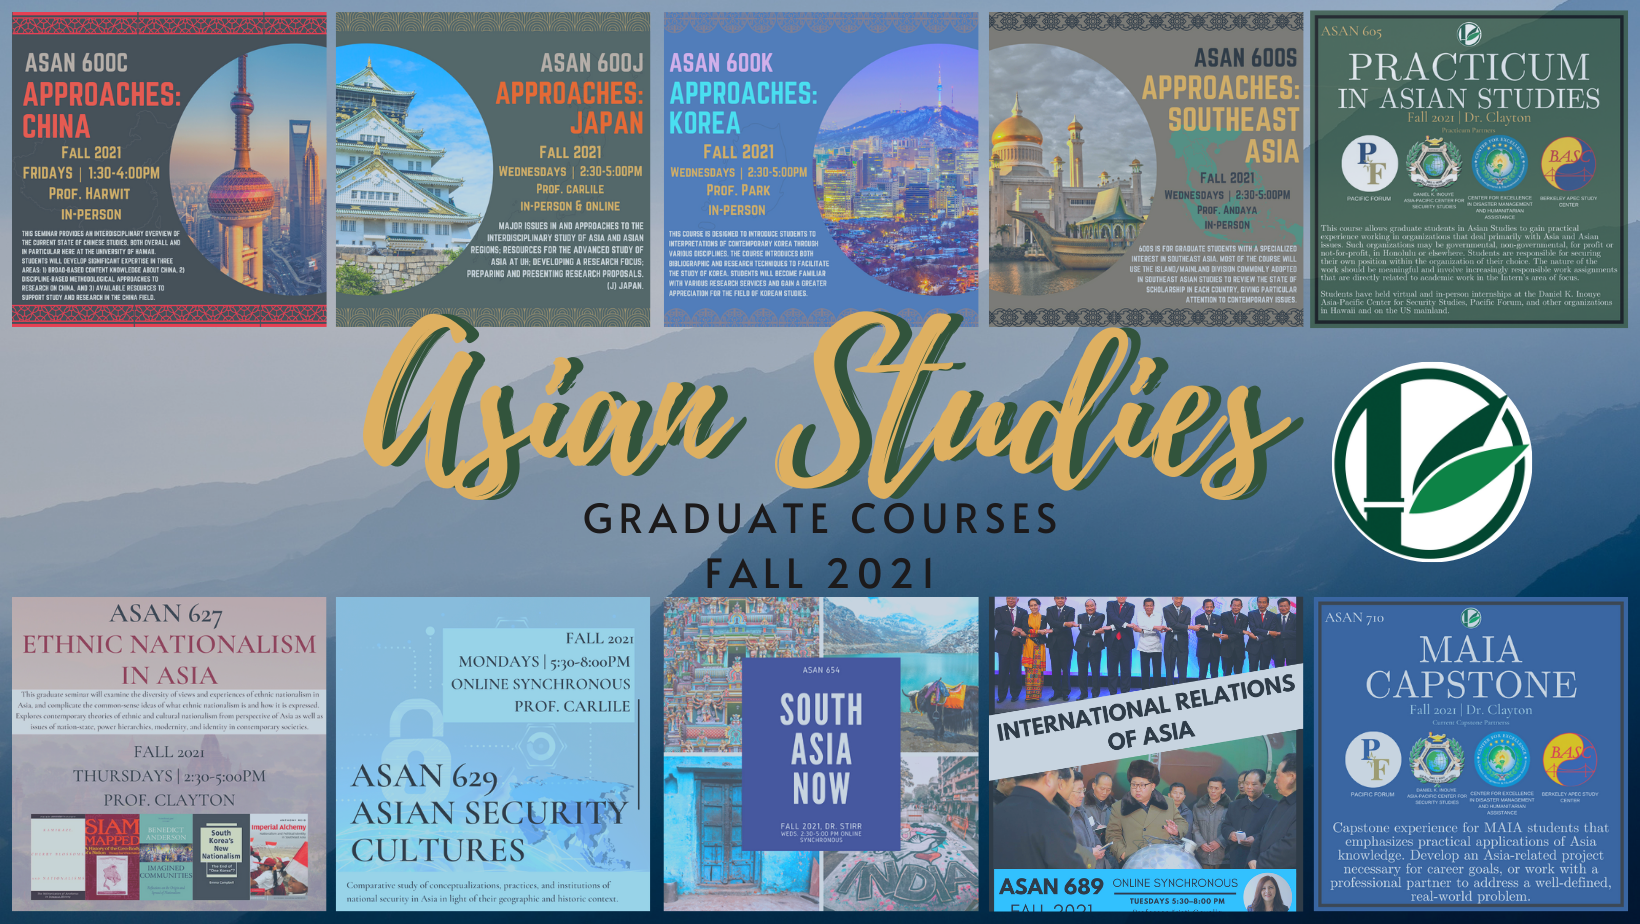 Header image containing all Asian studies graduate courses tiles. Center has "Asian Studies" in yellow and green script with the words "Graduate Courses Fall 2021" in black and all capital letters. Right side has Asian Studies Department logo, a white circle with green bamboo illustration.